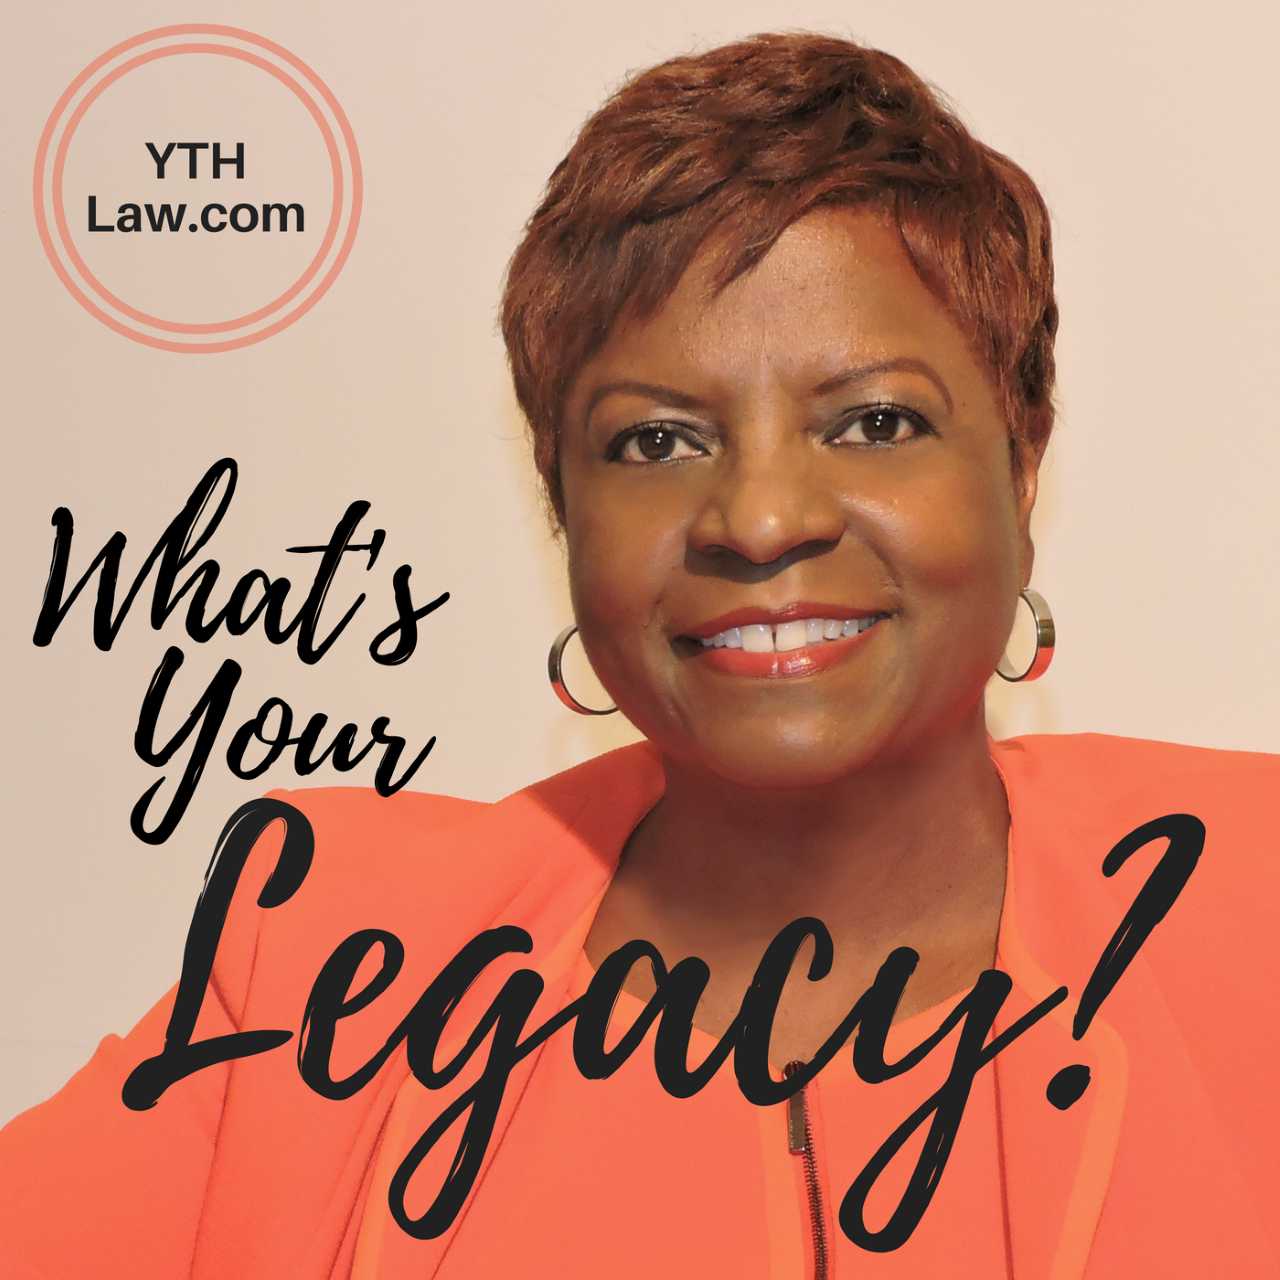 Attorney Yvette E Taylor with the text What's Your Legacy? and YTH Law.com